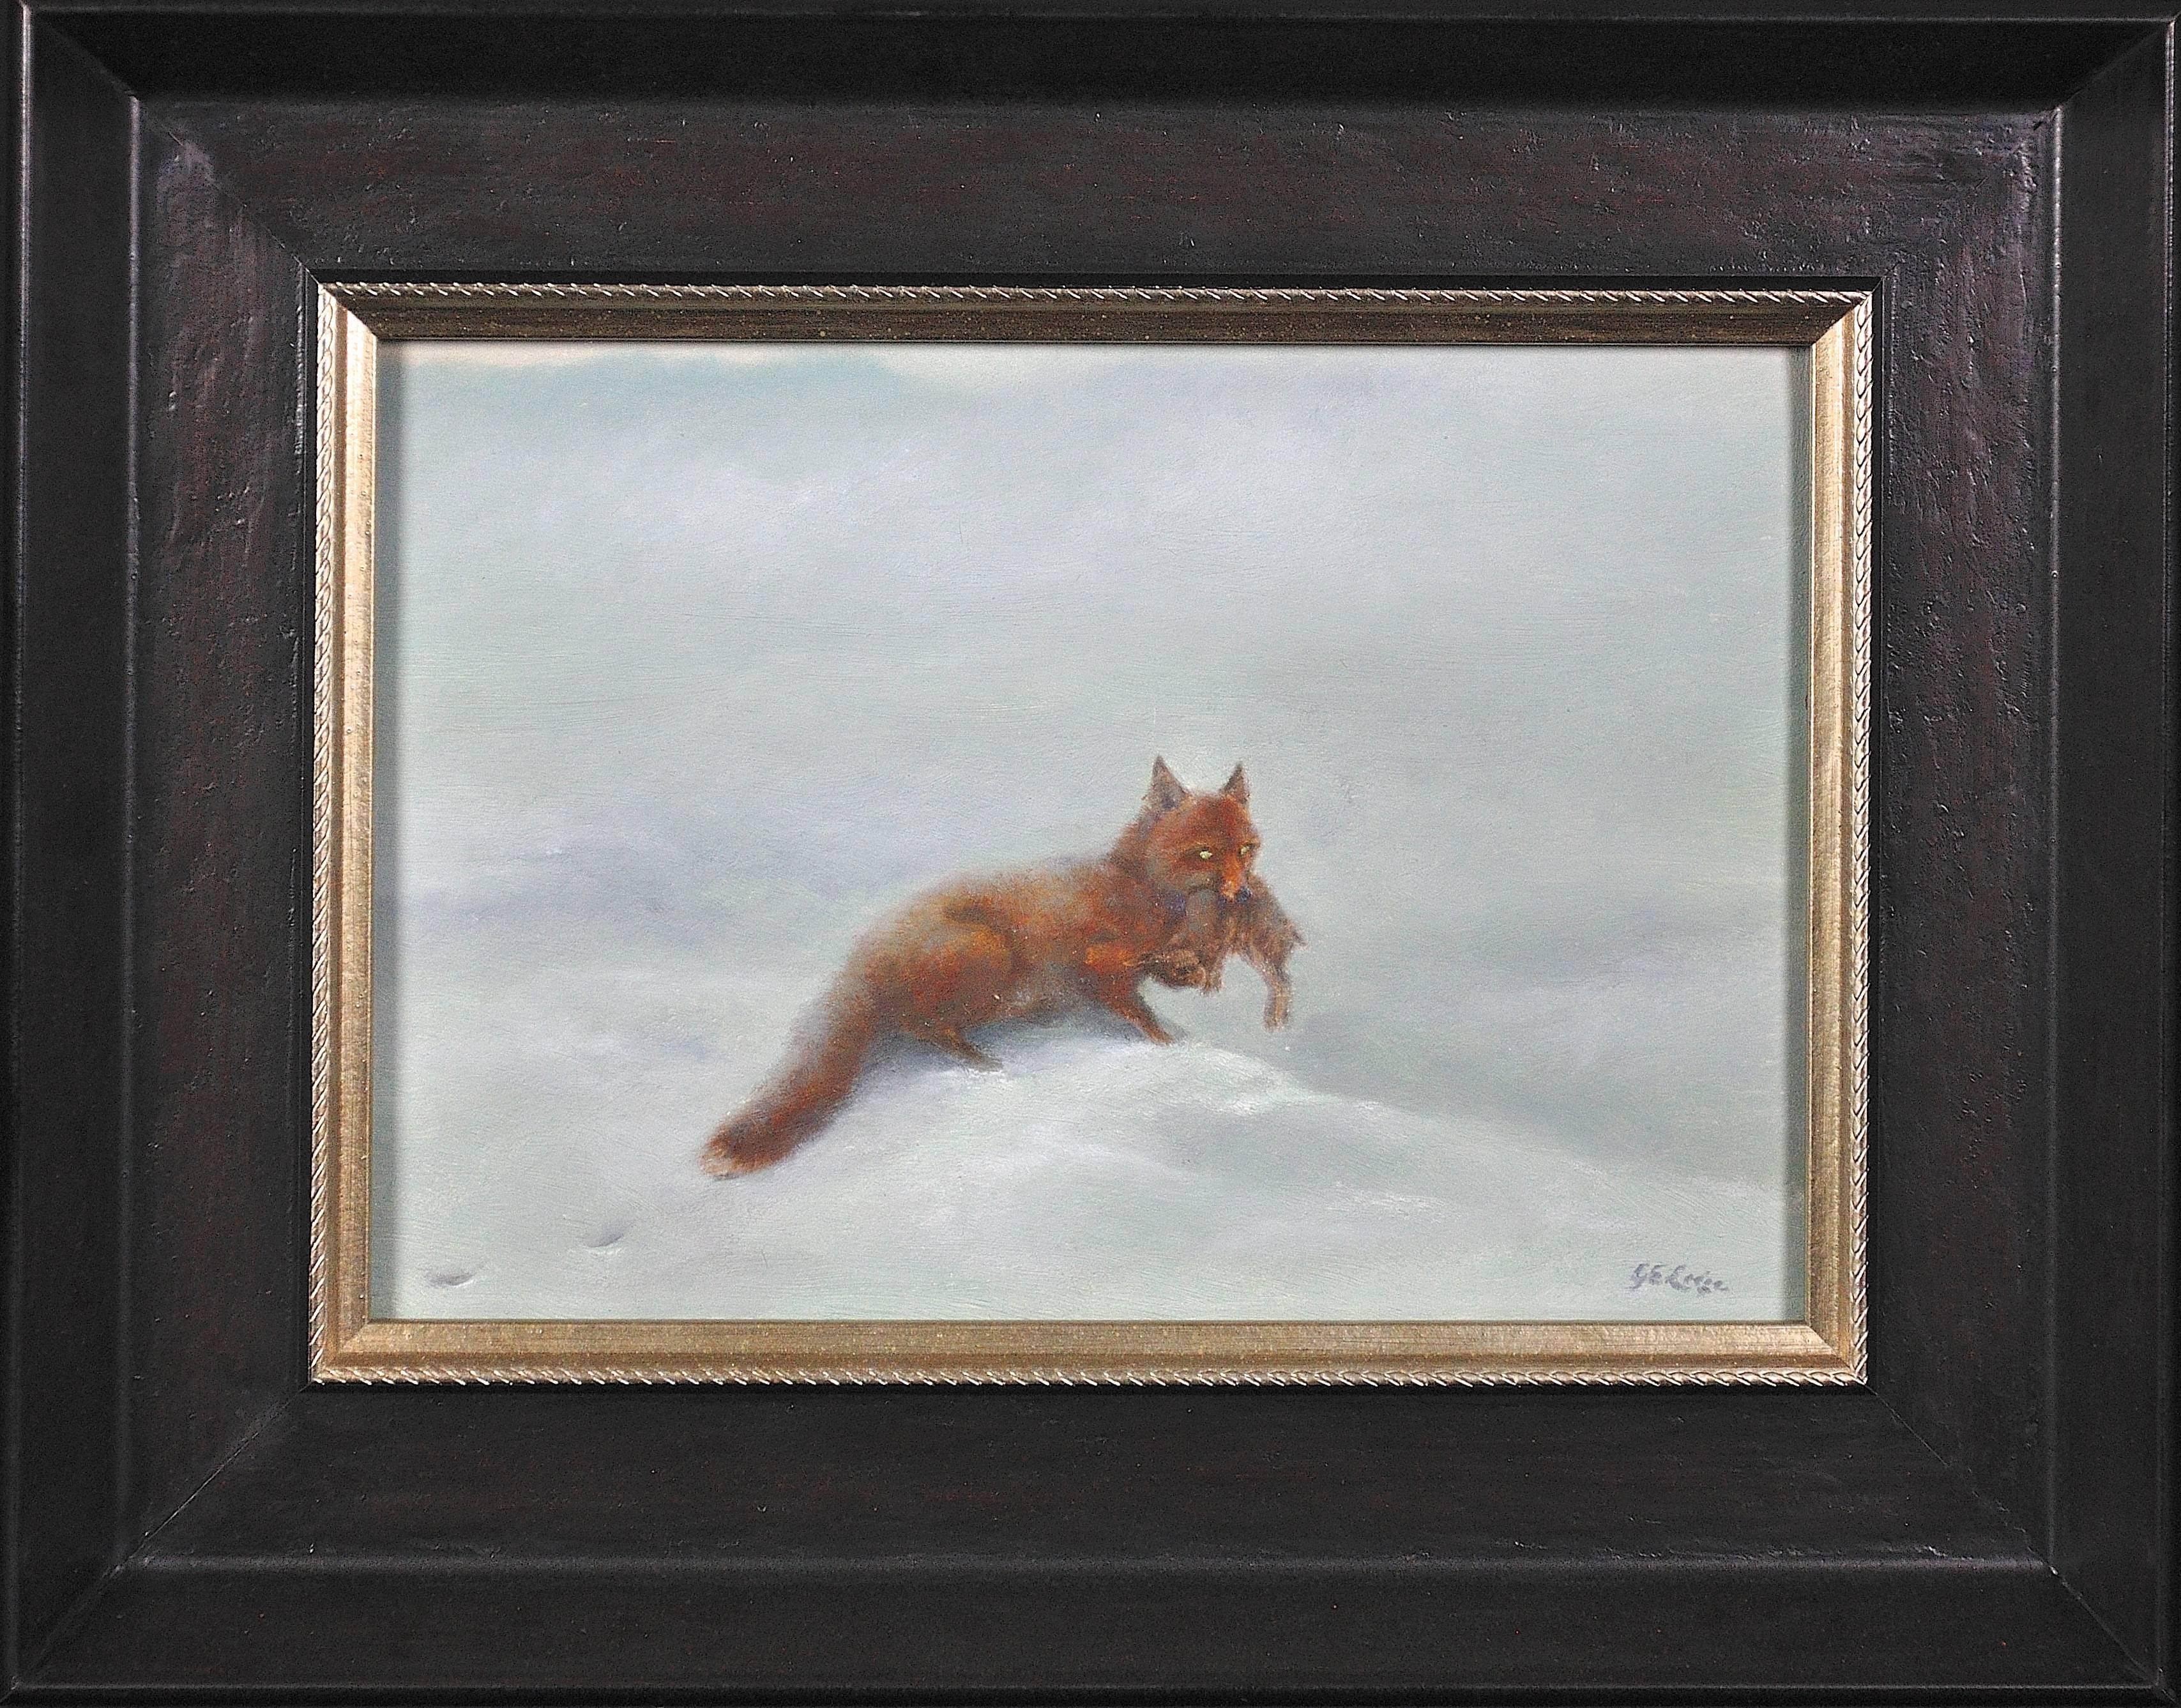 George Lodge Animal Painting - Fox with Leveret amongst snow fields. One of the wildlife greats of all time.